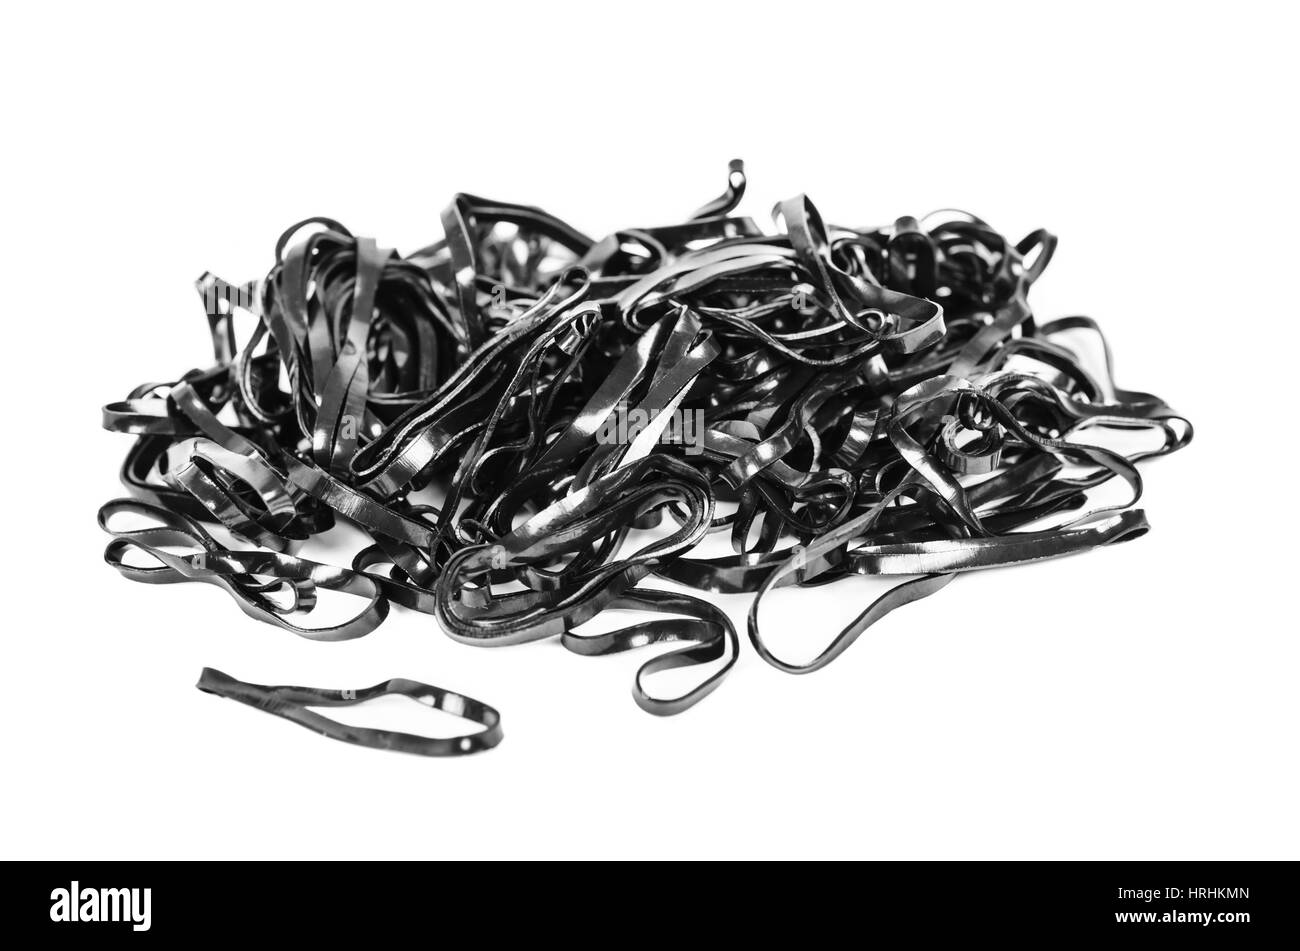 Black rubber bands on a white background Stock Photo